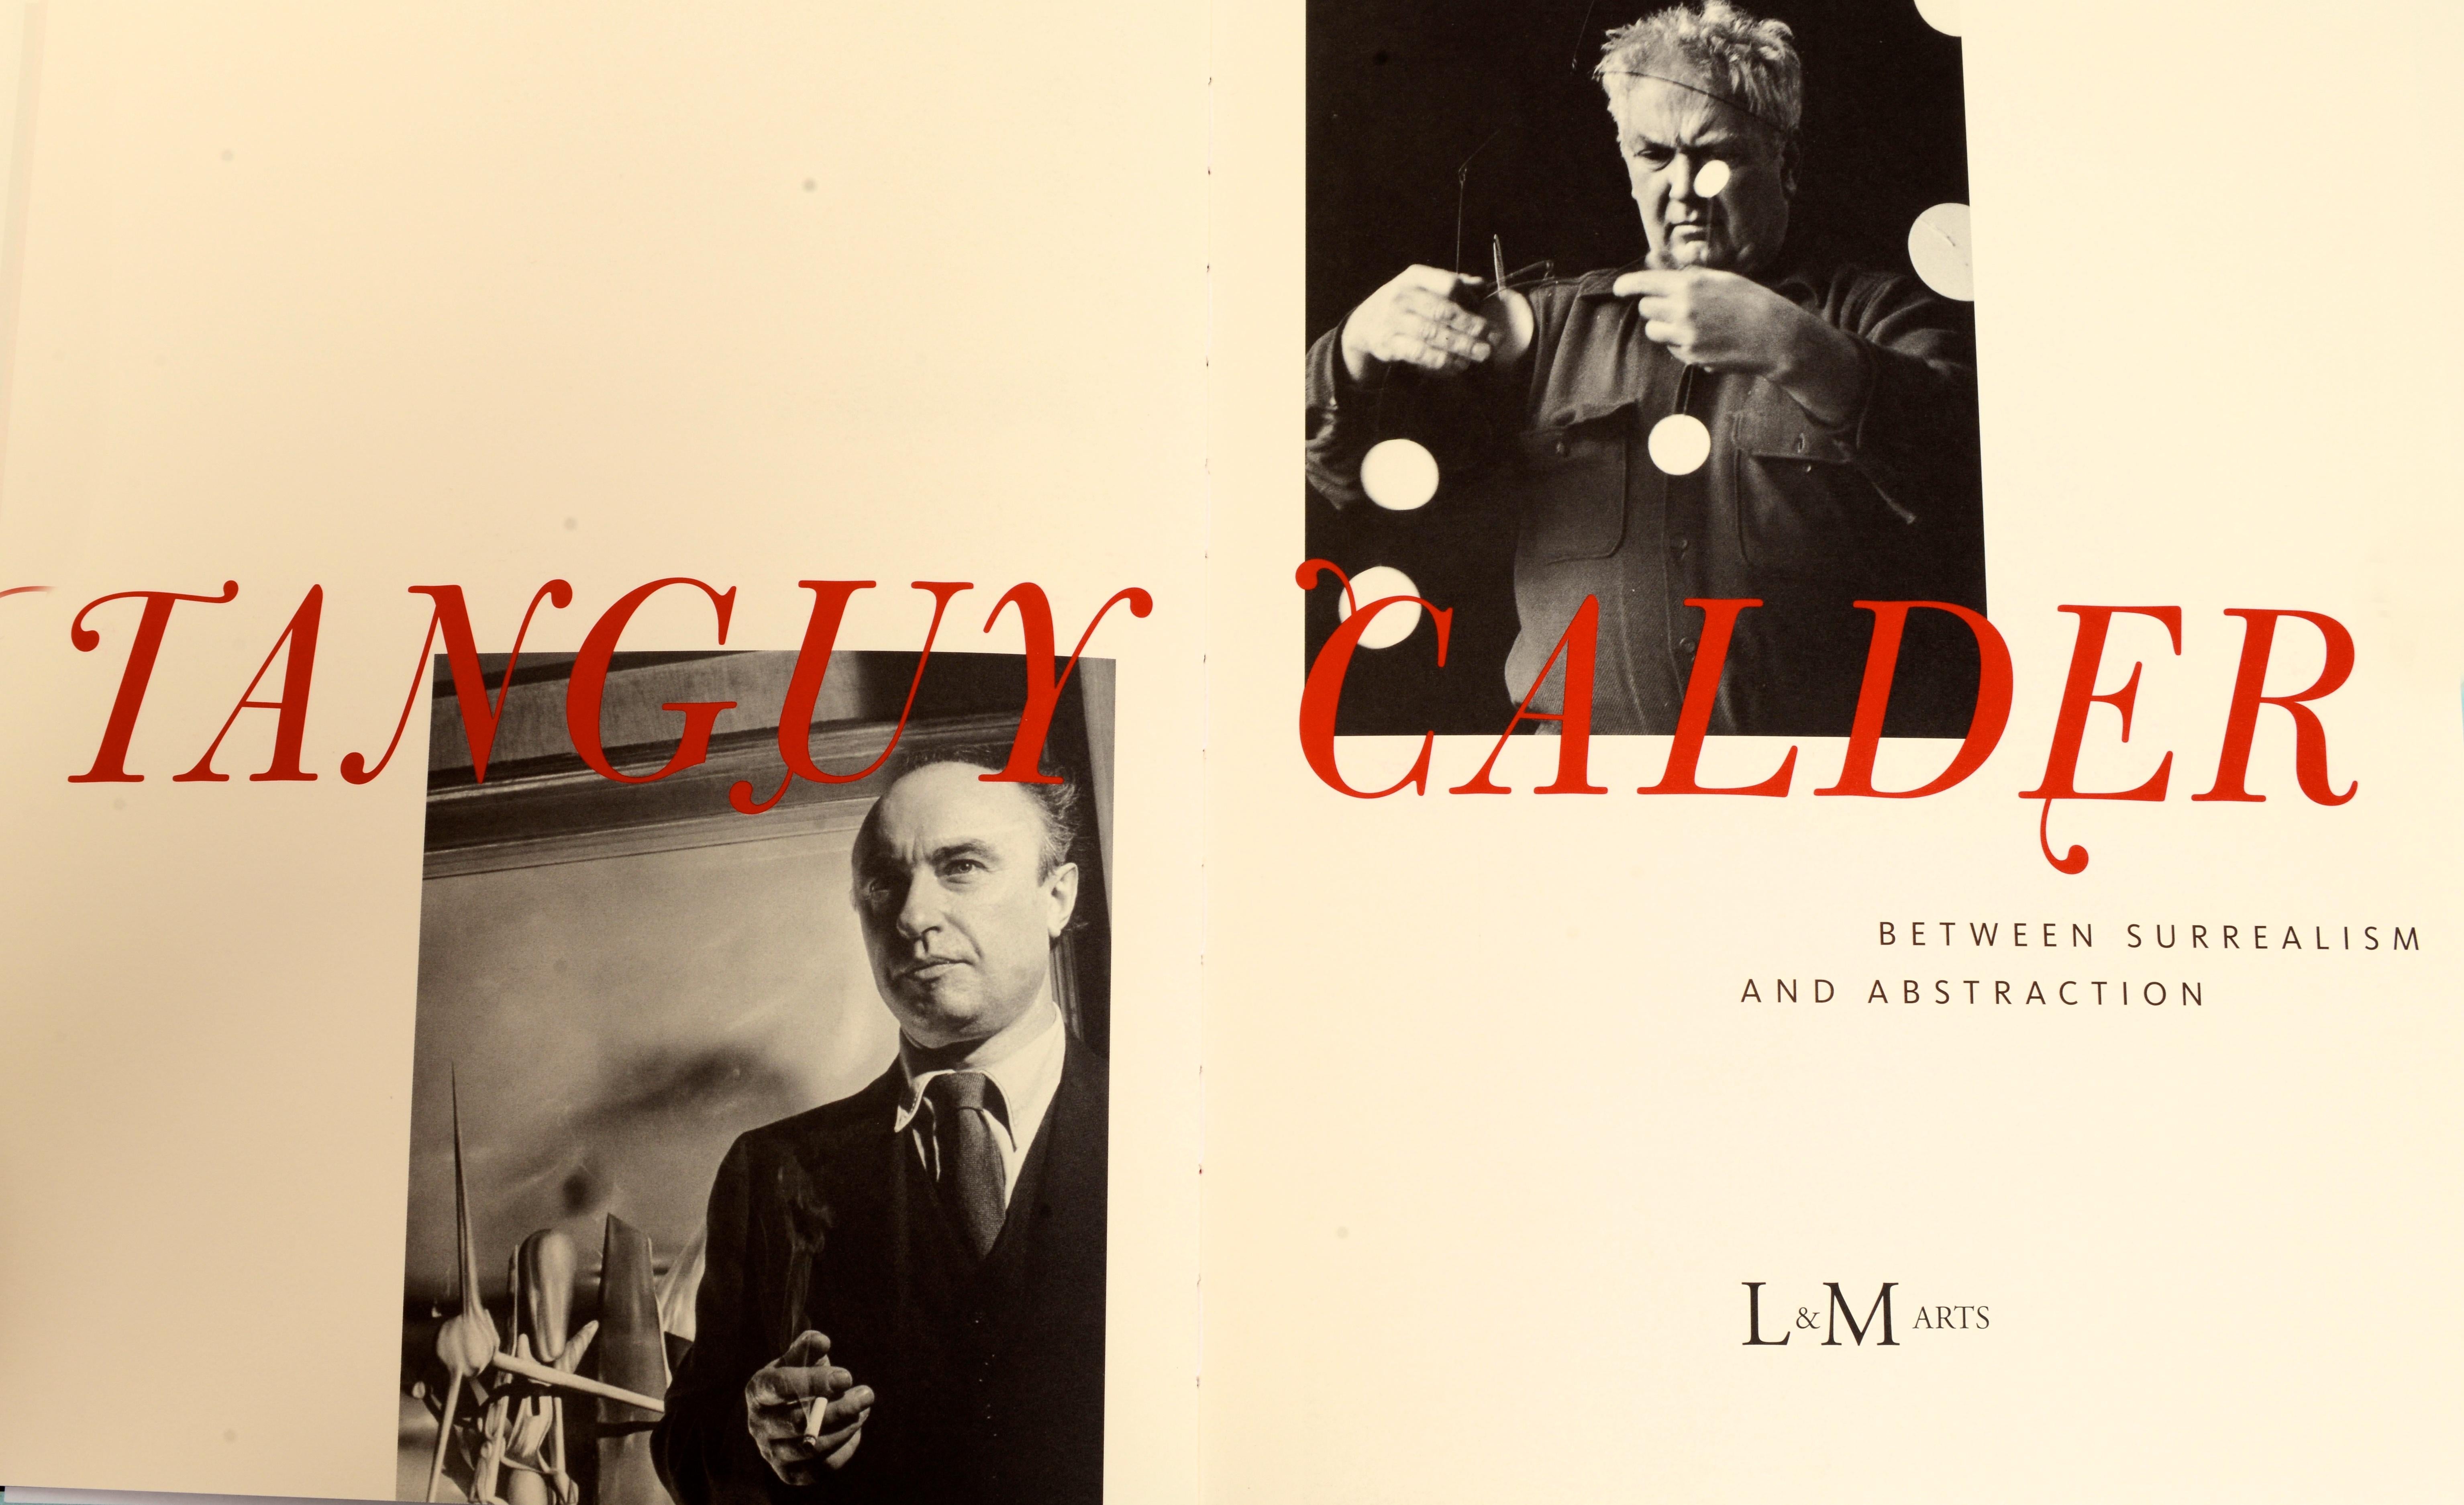 Yves Tanguy & Alexander Calder: Between Surrealism and Abstraction, by Yves Tanguy, Alexander Calder, and Susan Davidson. Published for an exhibition April 21-June 12, 2010, by L&M Arts, Netherlands, 2010. 1st Ed hardcover no dust jacket as issued.